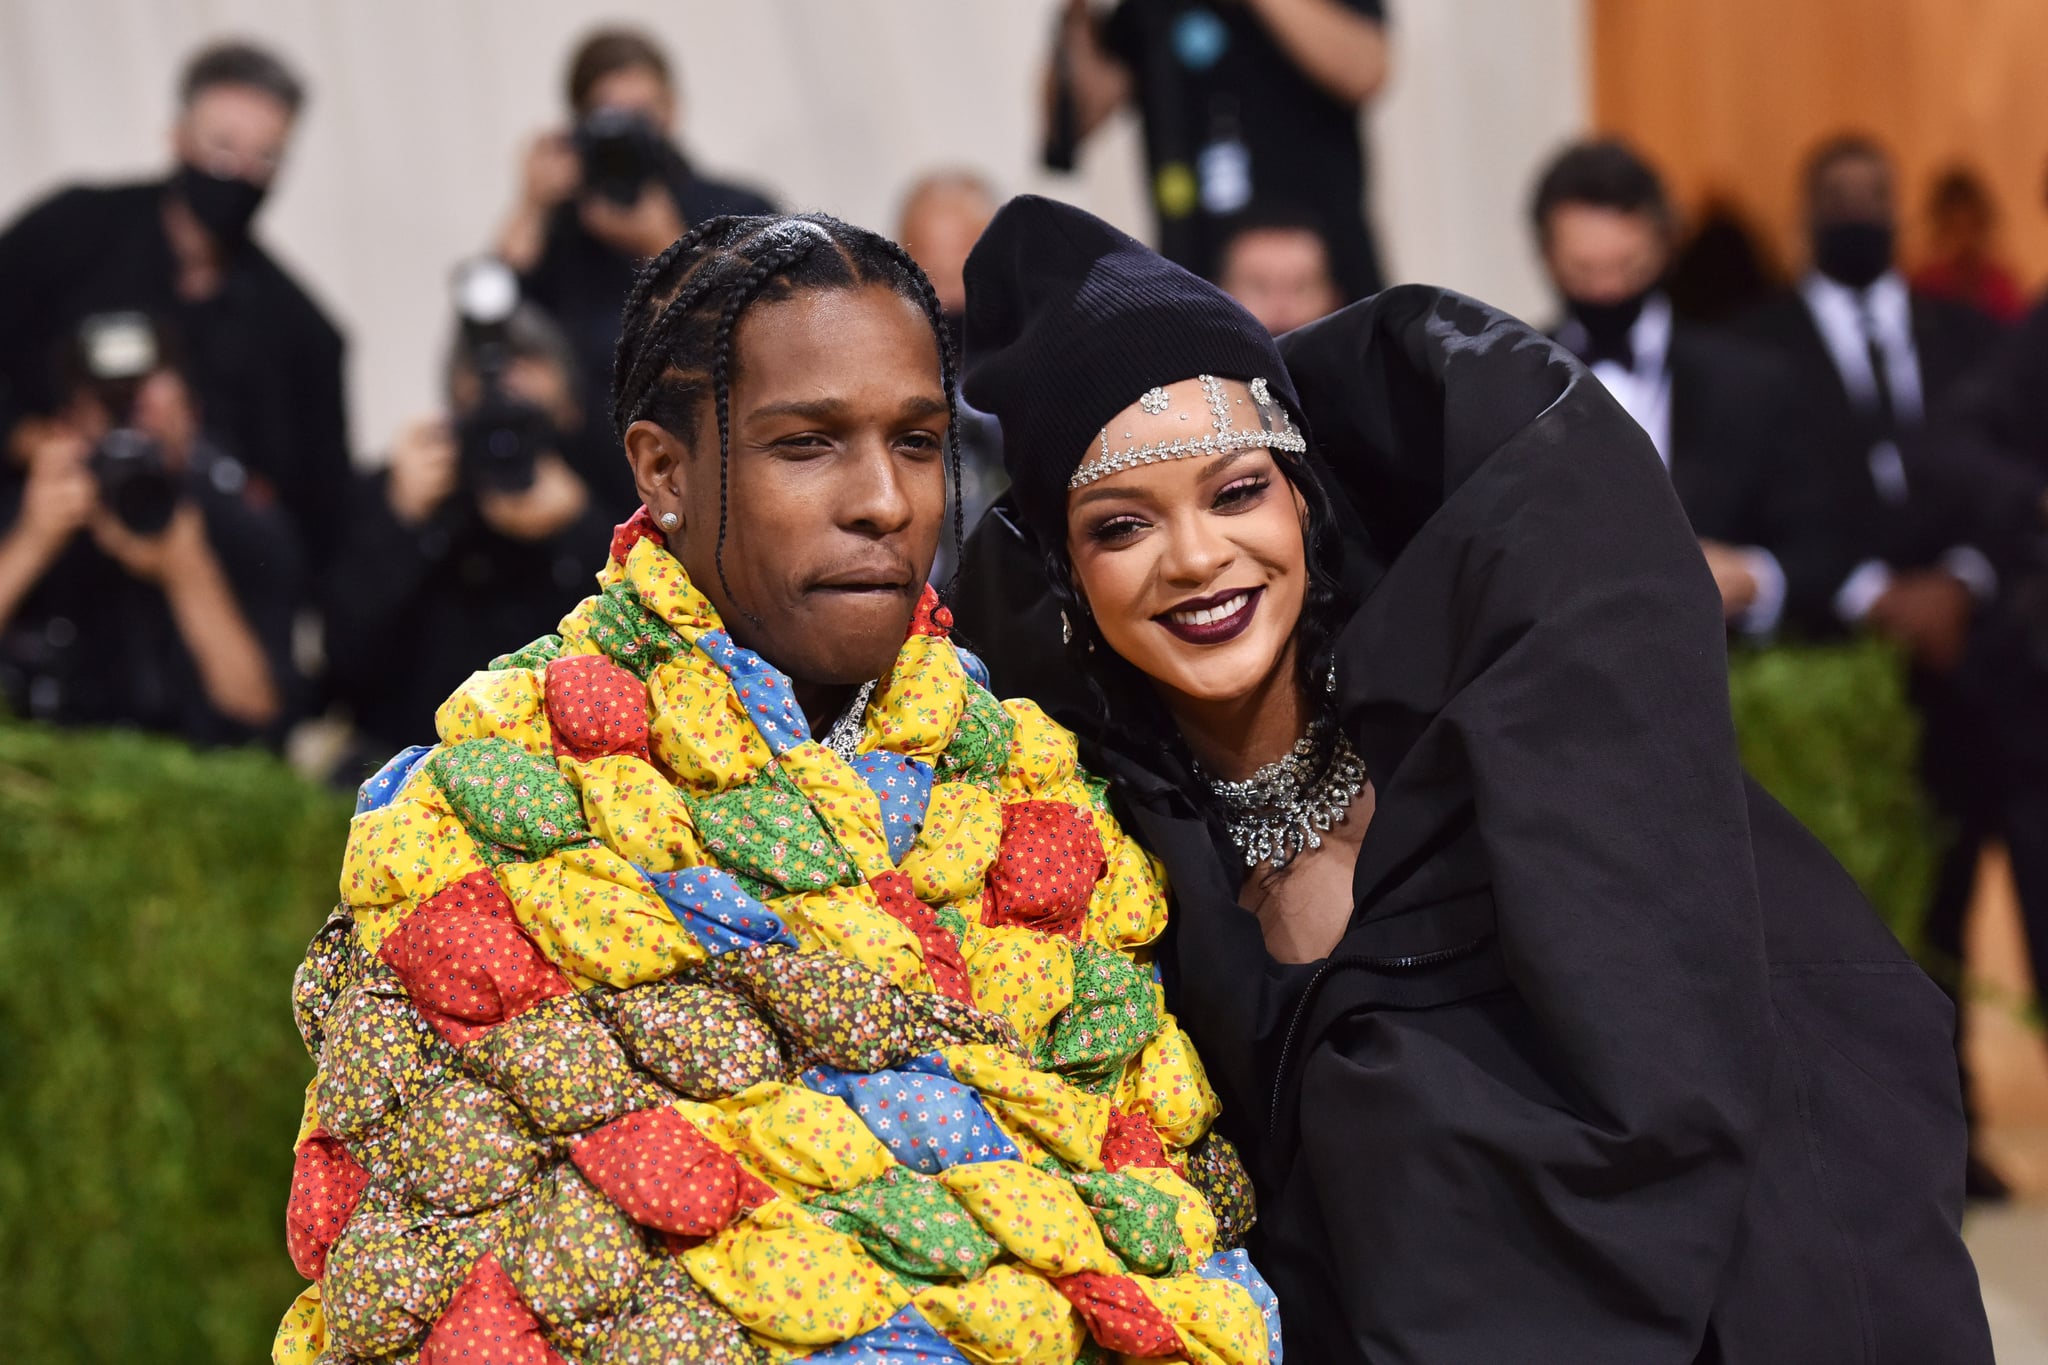 NEW YORK, NEW YORK - SEPTEMBER 13: ASAP Rocky and Rihanna attend 2021 Costume Institute Benefit - In America: A Lexicon of Fashion at the Metropolitan Museum of Art on September 13, 2021 in New York City. (Photo by Sean Zanni/Patrick McMullan via Getty Images)